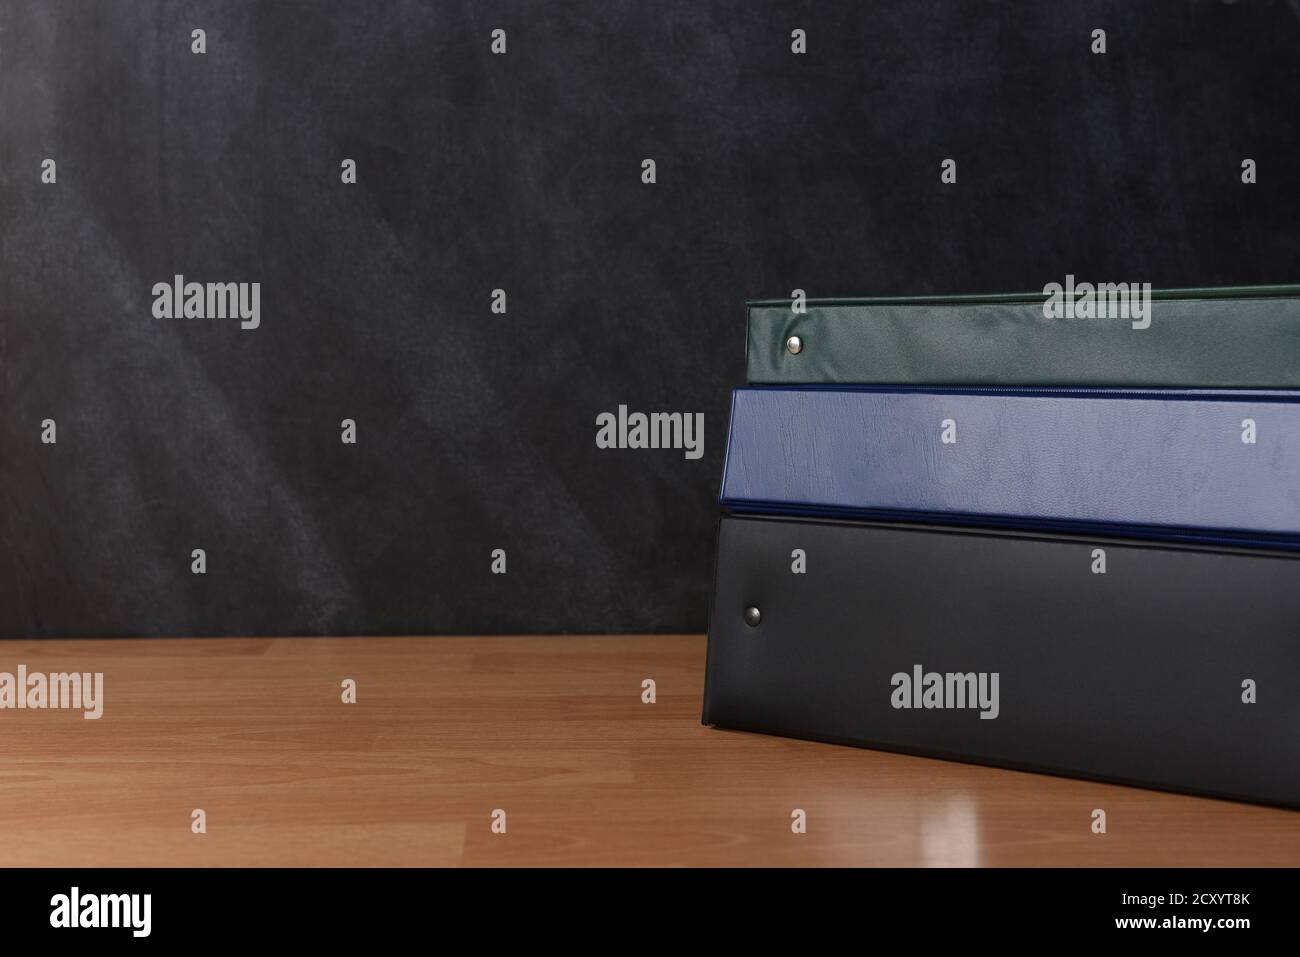 A stack of different colored binders on a teachers desk in front of a chalkboard. Stock Photo